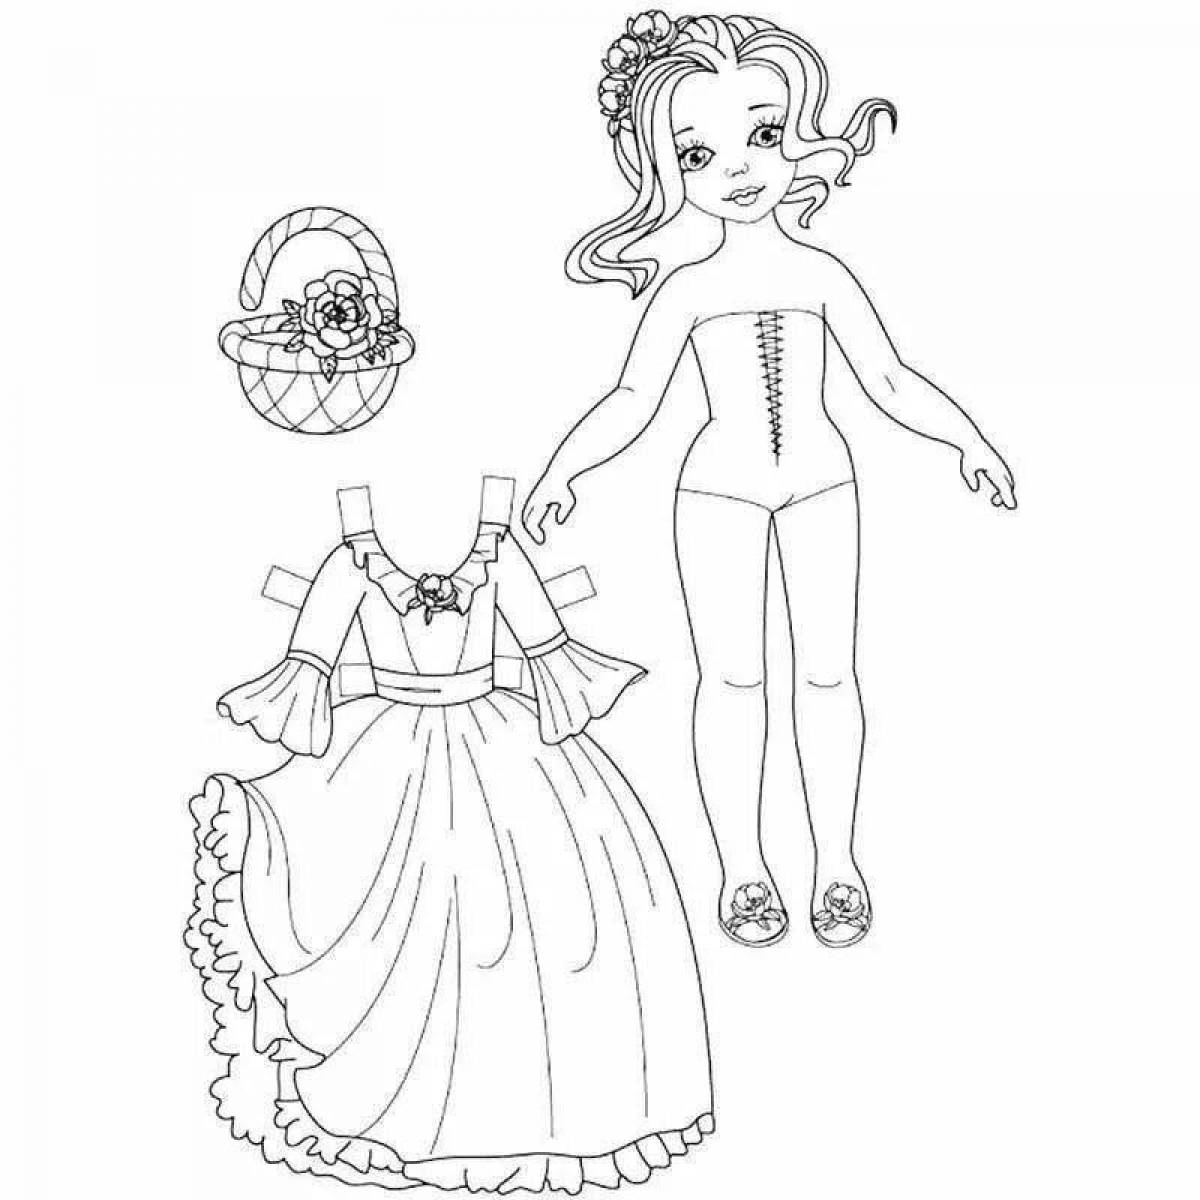 Fancy doll and cutout of her clothes